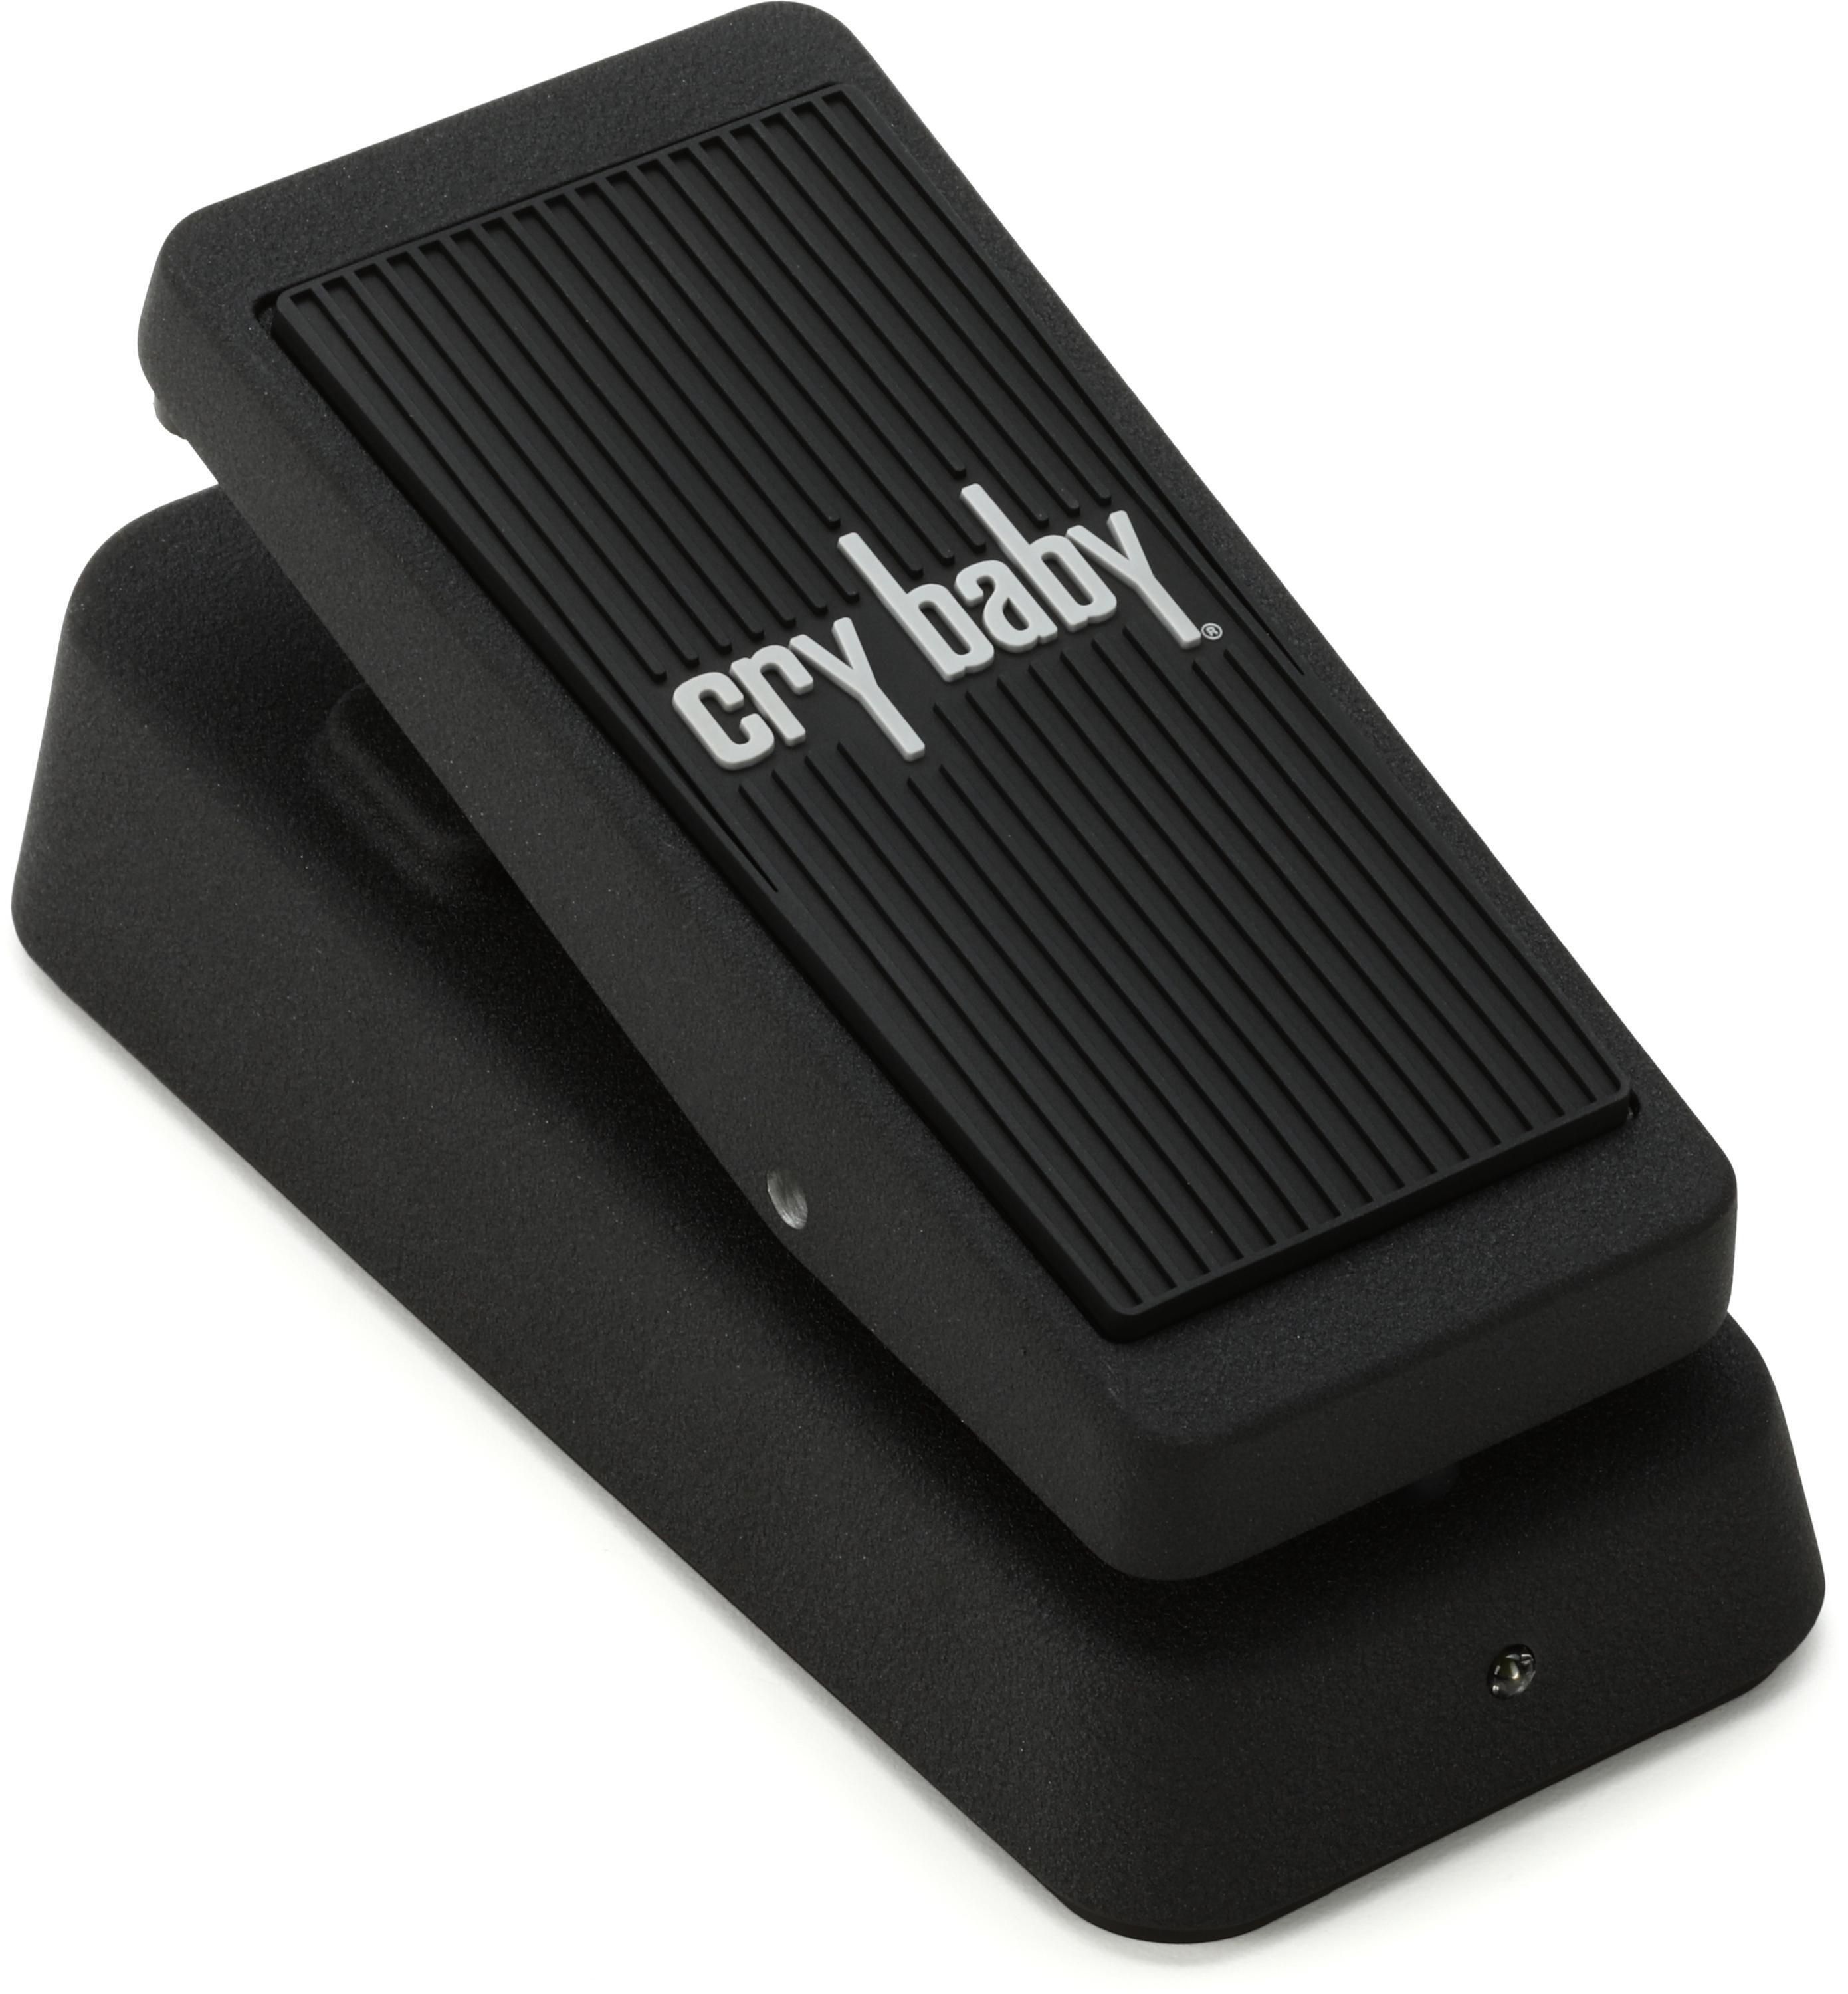 Dunlop CBJ95 Cry Baby Junior Wah Pedal Reviews | Sweetwater